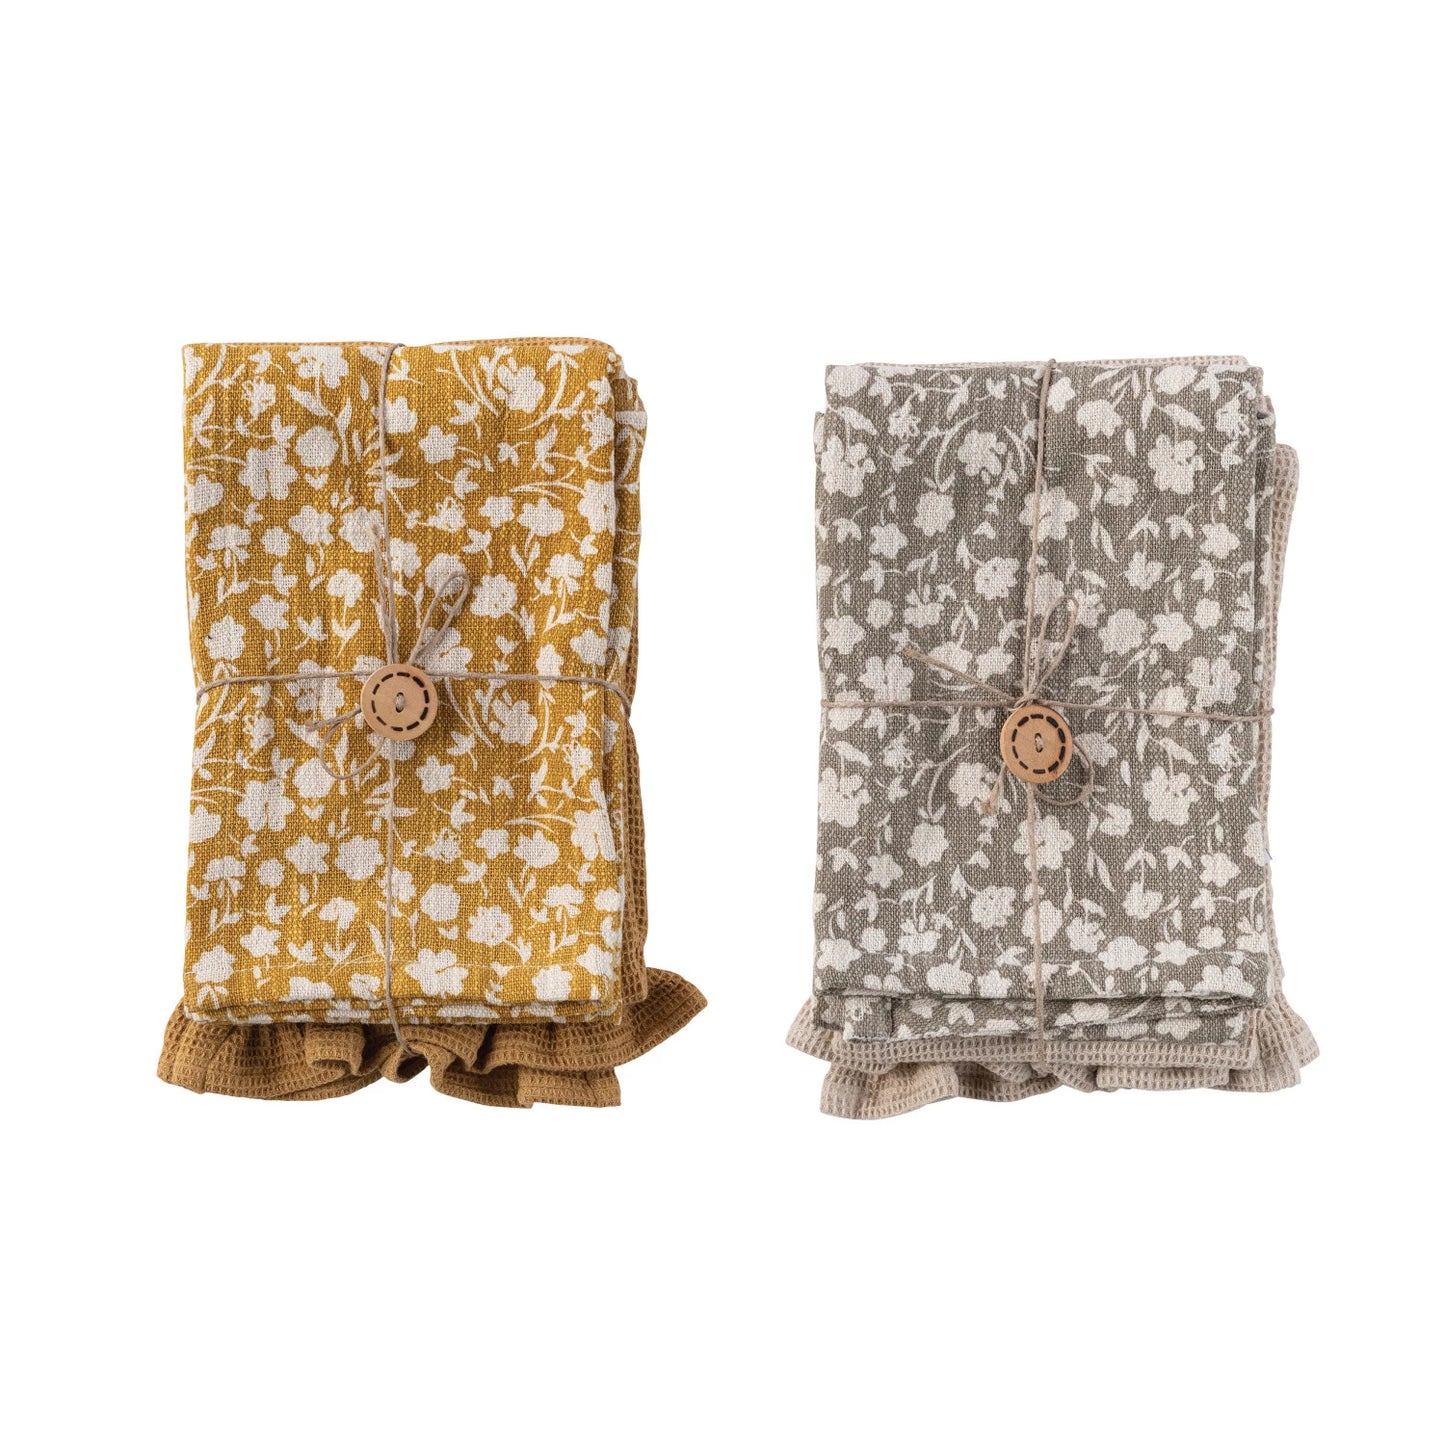 both styles of floral printed cotton waffle tea towels folded and displayed against a white background